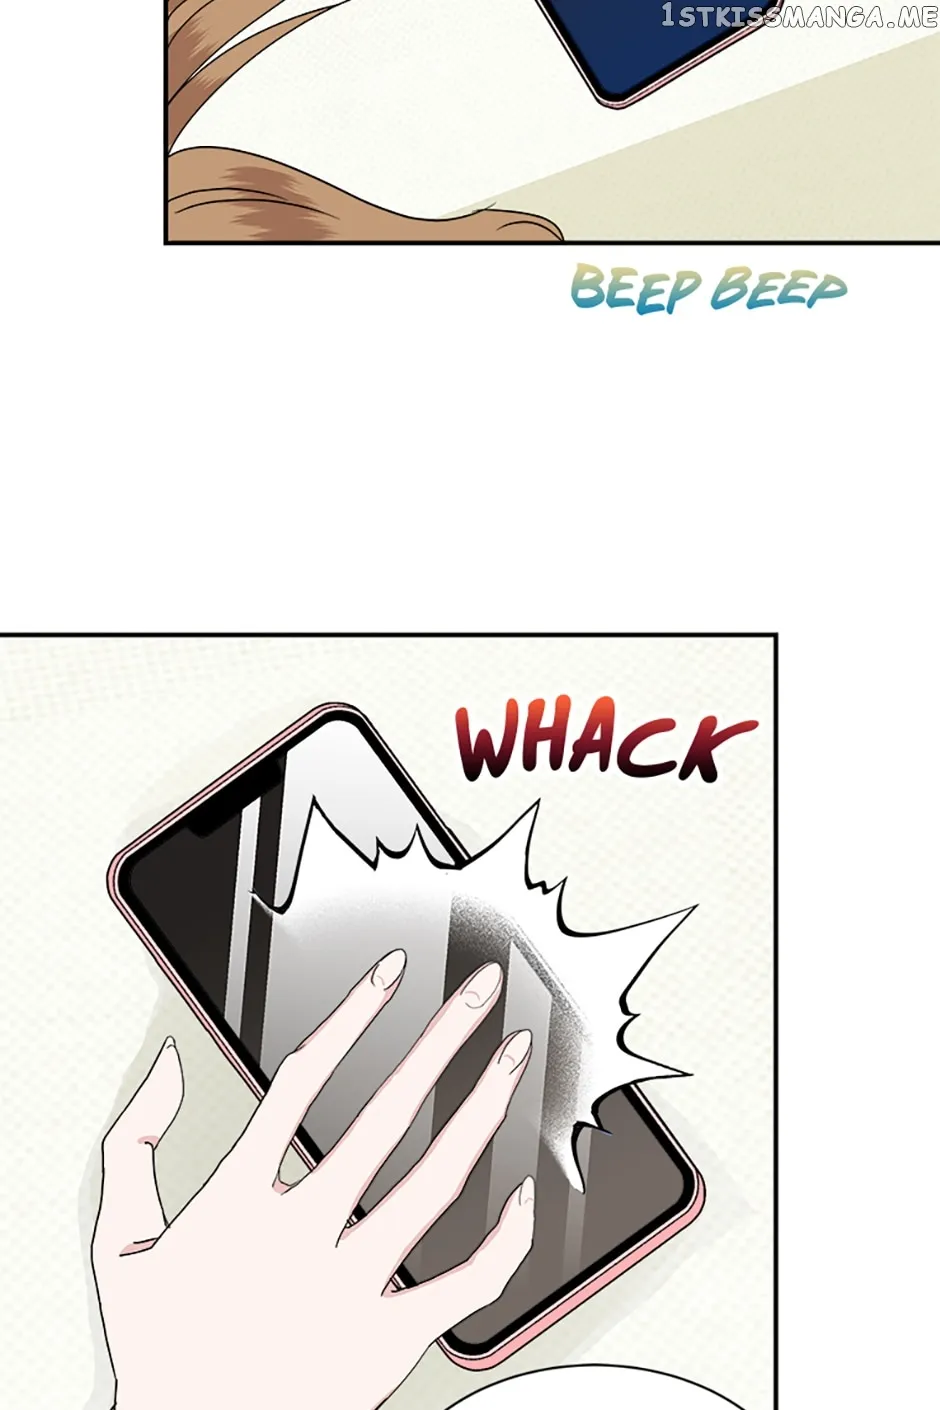 My Boss Can’T Sleep Without Me - Page 2